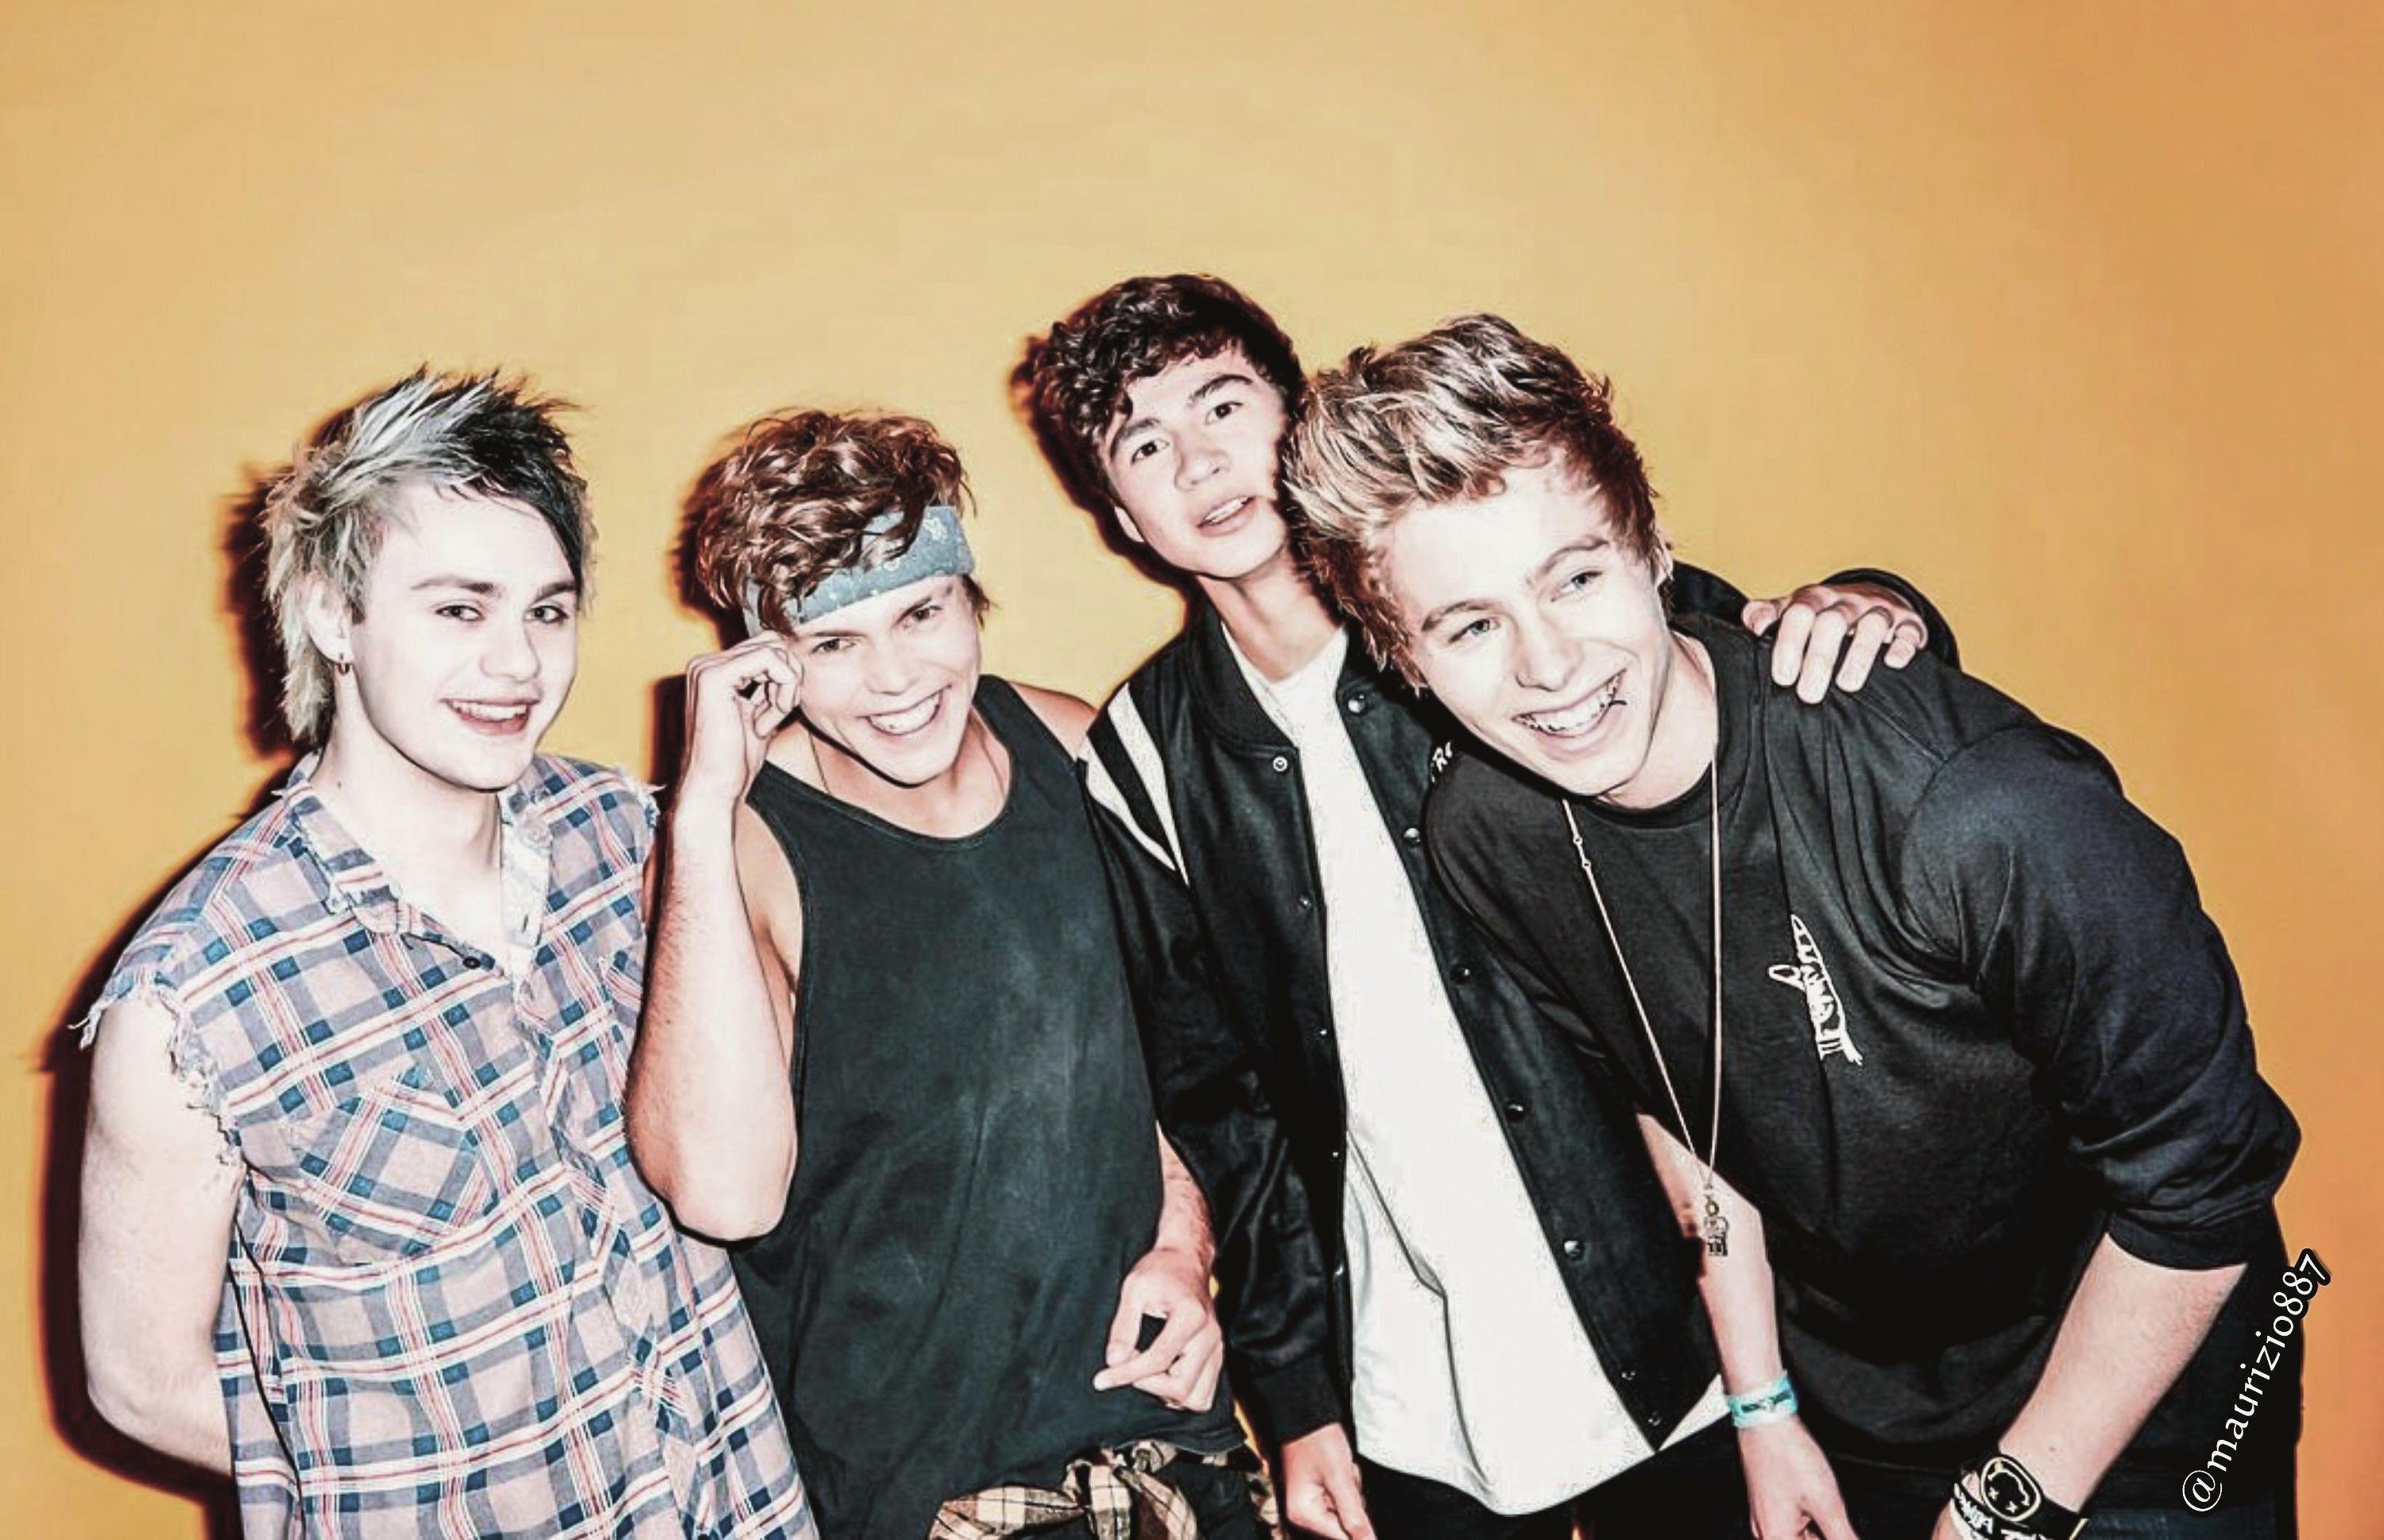 5 Seconds Of Summer Wallpapers Top Free 5 Seconds Of Summer